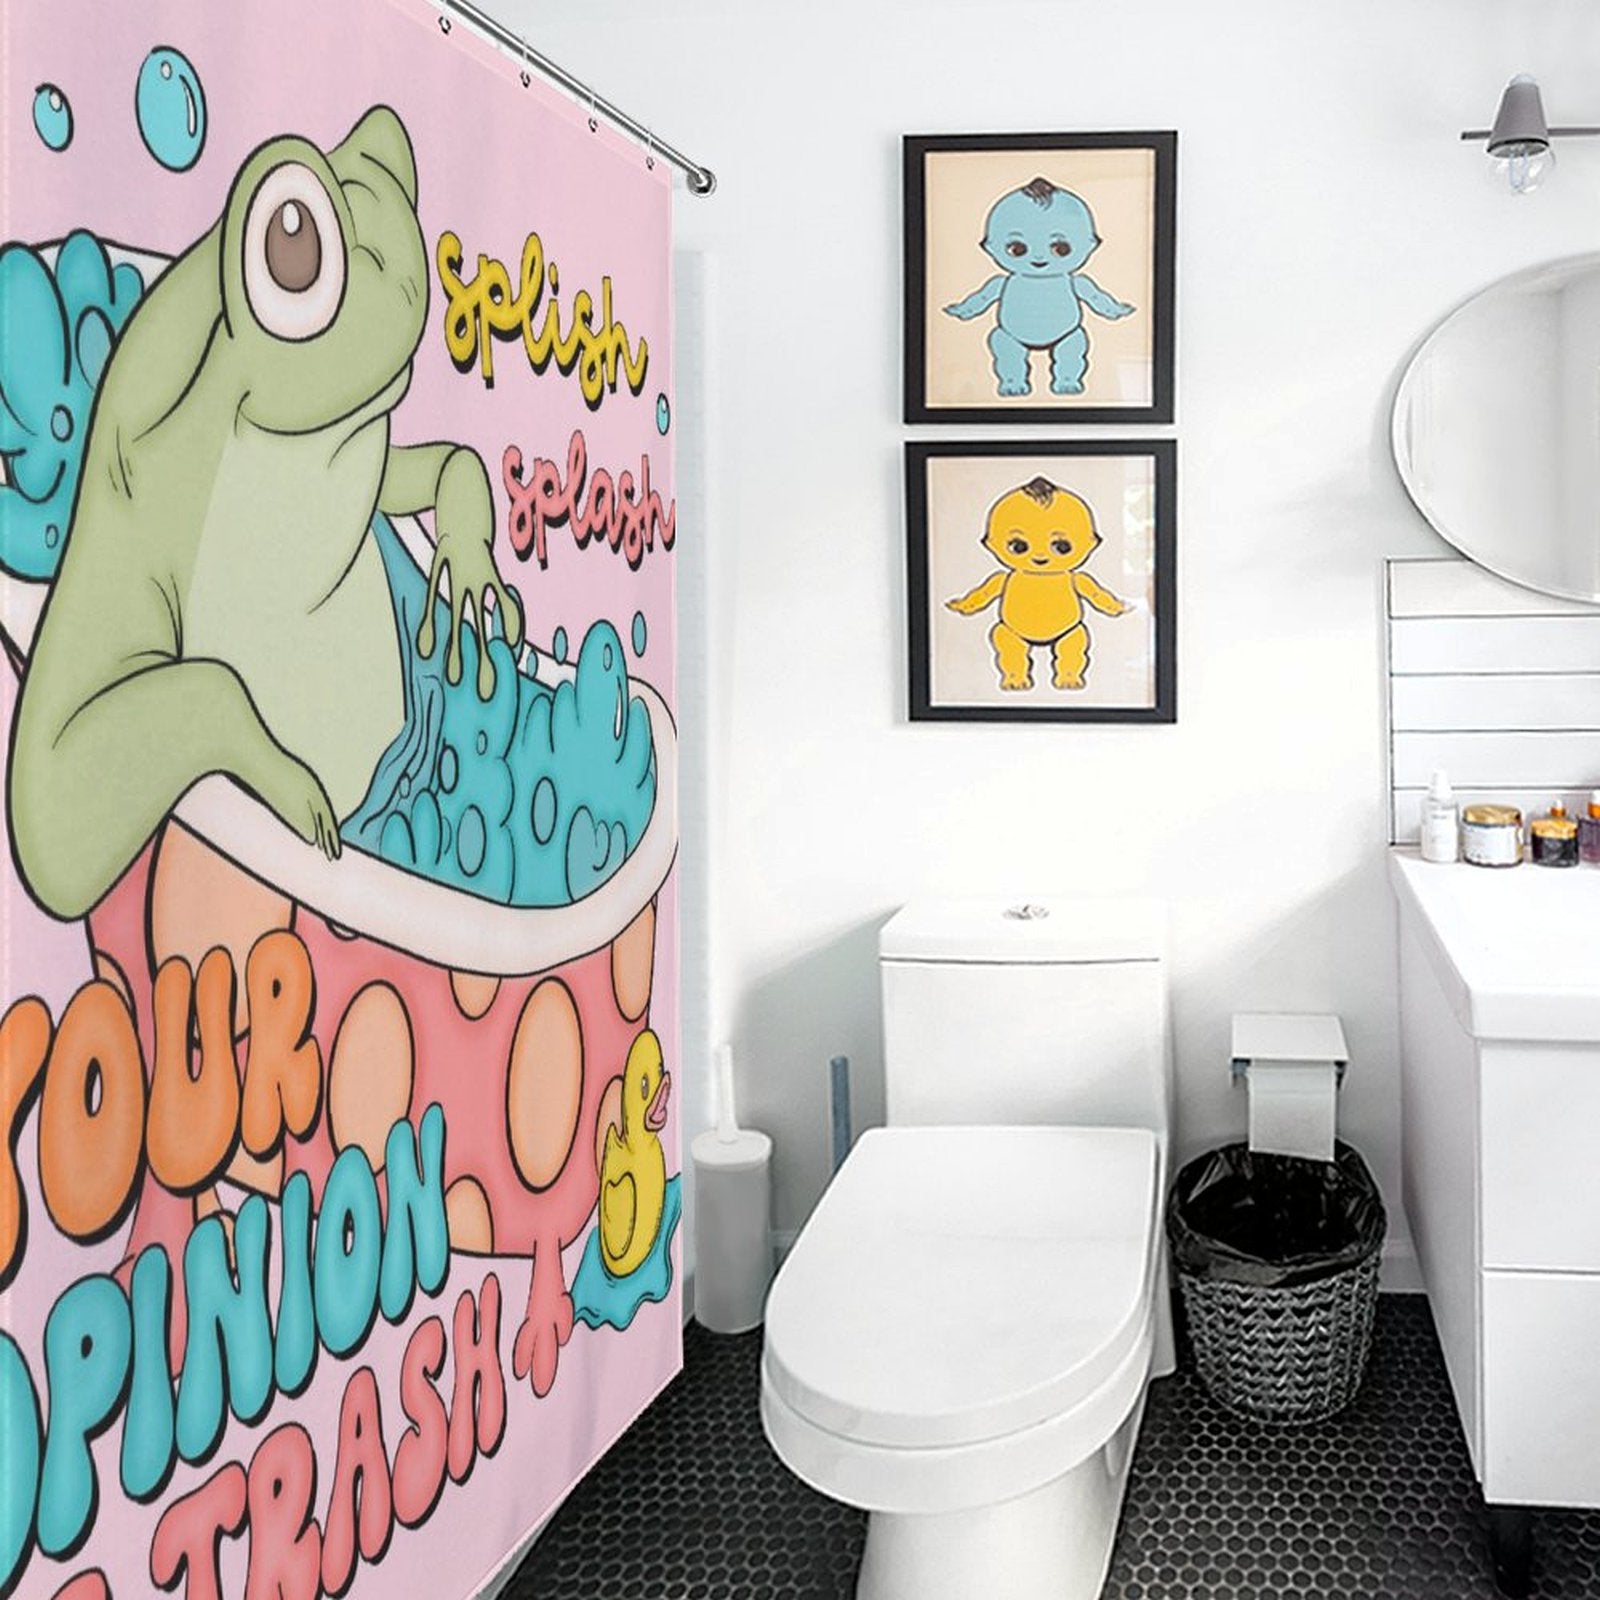 Bathroom with a white toilet, sink, trash bin, and mirror. There's a Cotton Cat Funny Humor Sarcastic Froggy Shower Curtain-Cottoncat featuring a frog in a bath with the text "Your opinion is trash," and two framed cartoon art pieces on the wall.